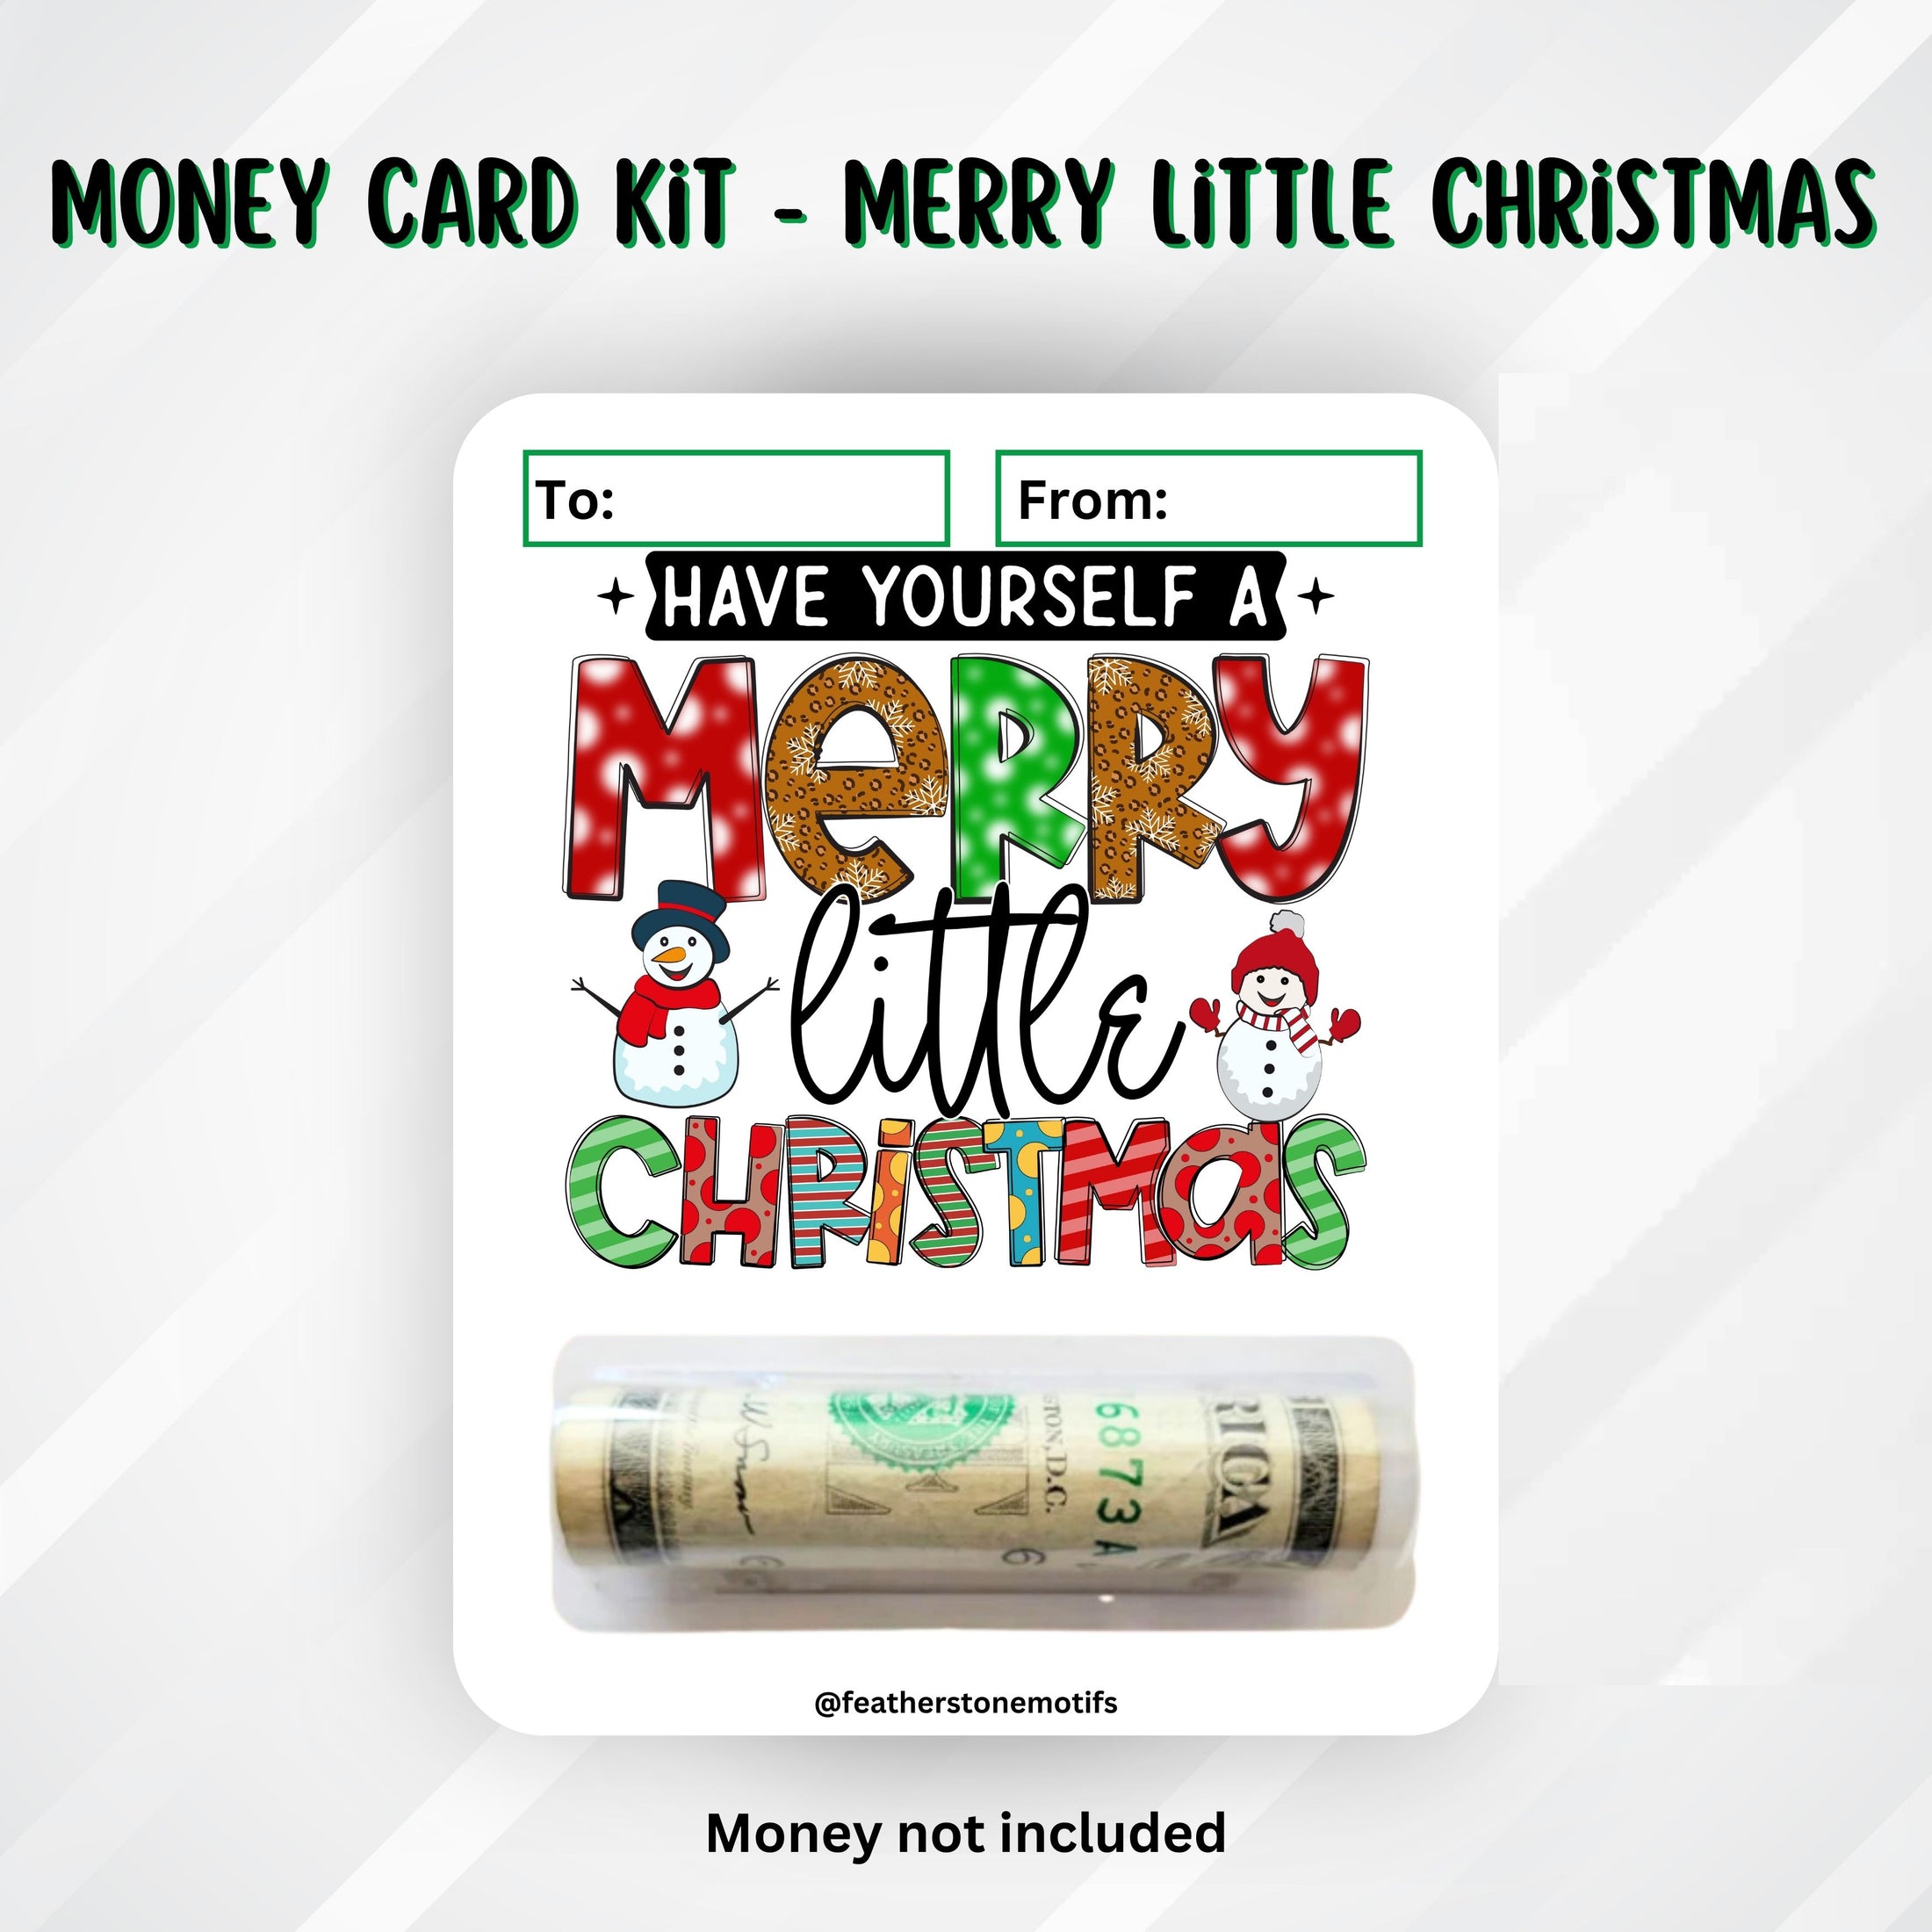 This image shows the money tube attached to the Merry Little Christmas Money Card.